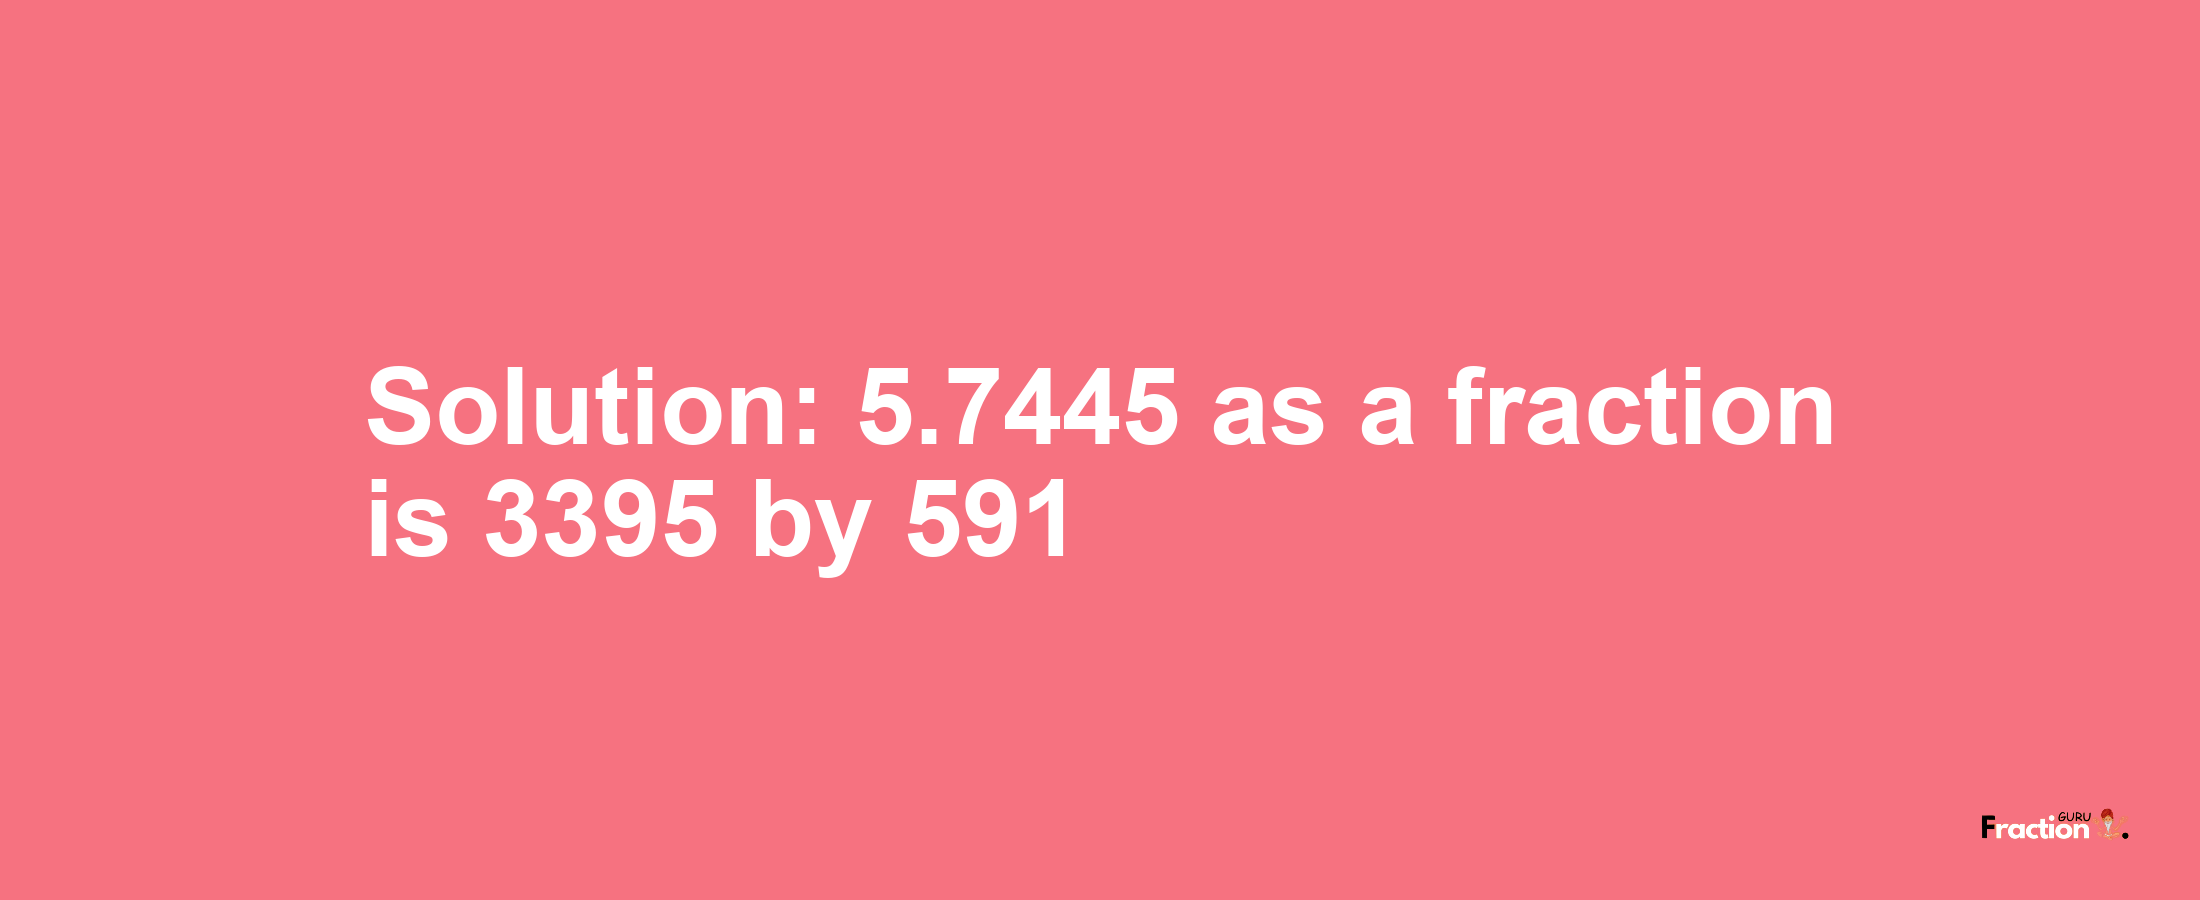 Solution:5.7445 as a fraction is 3395/591